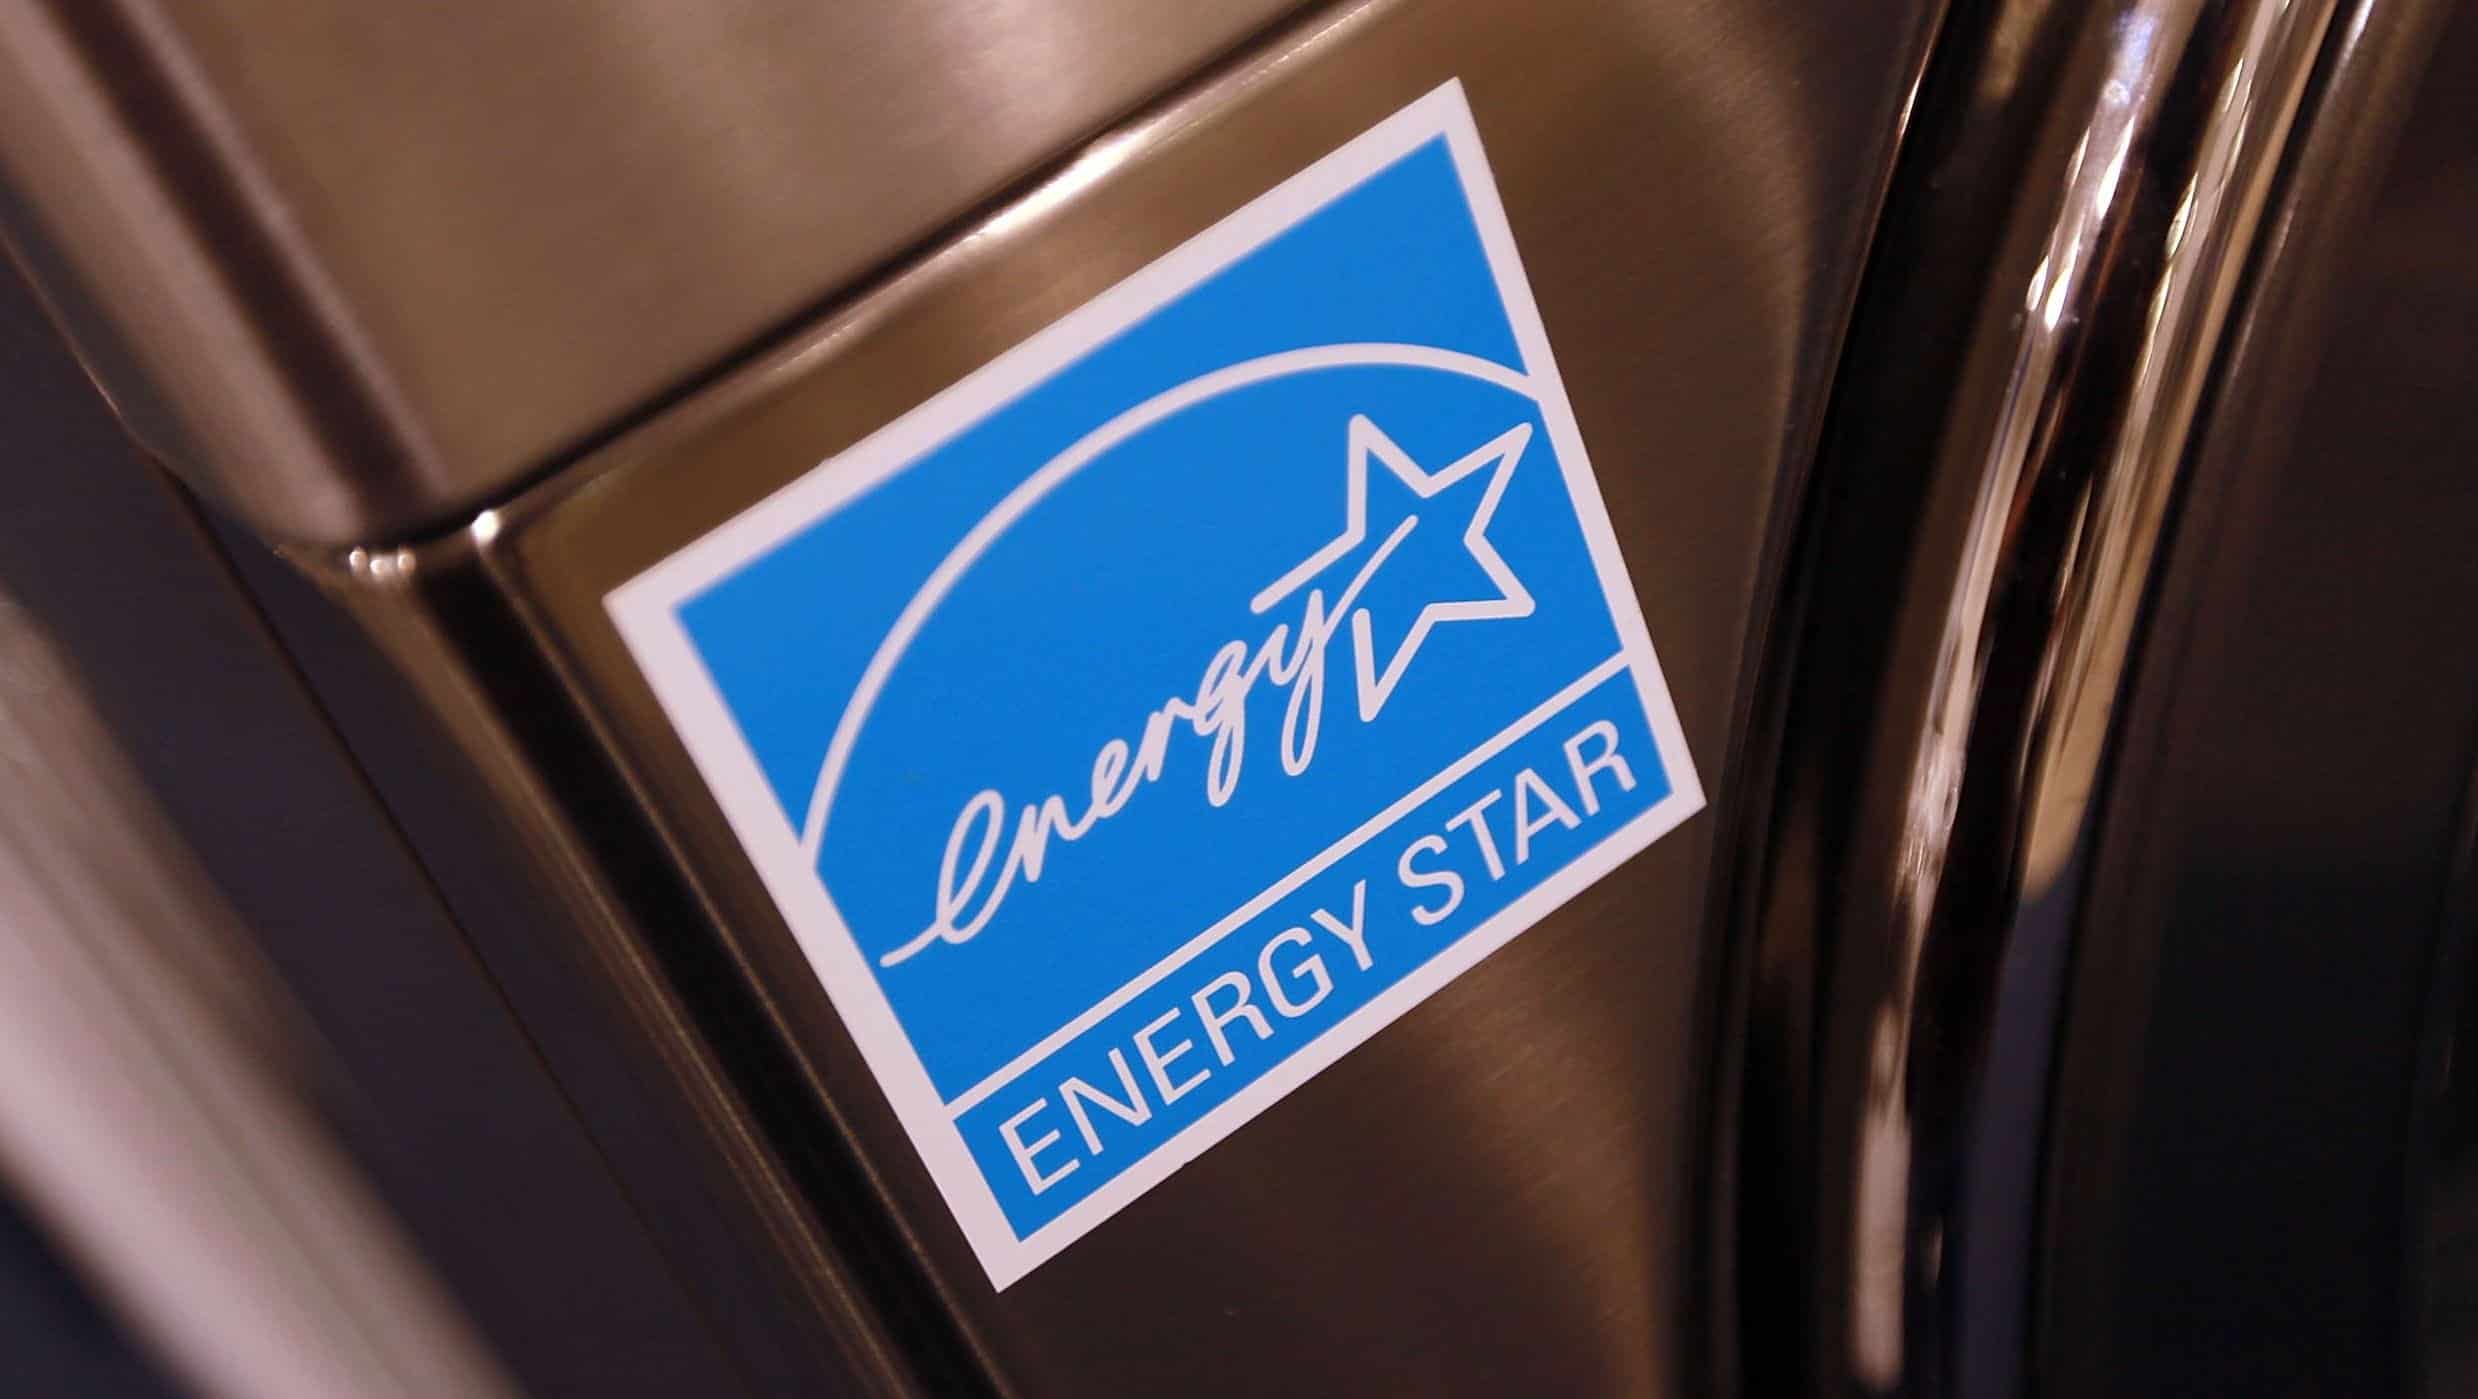 Super-Charged: Energy Star Through the Eyes of LEED v4